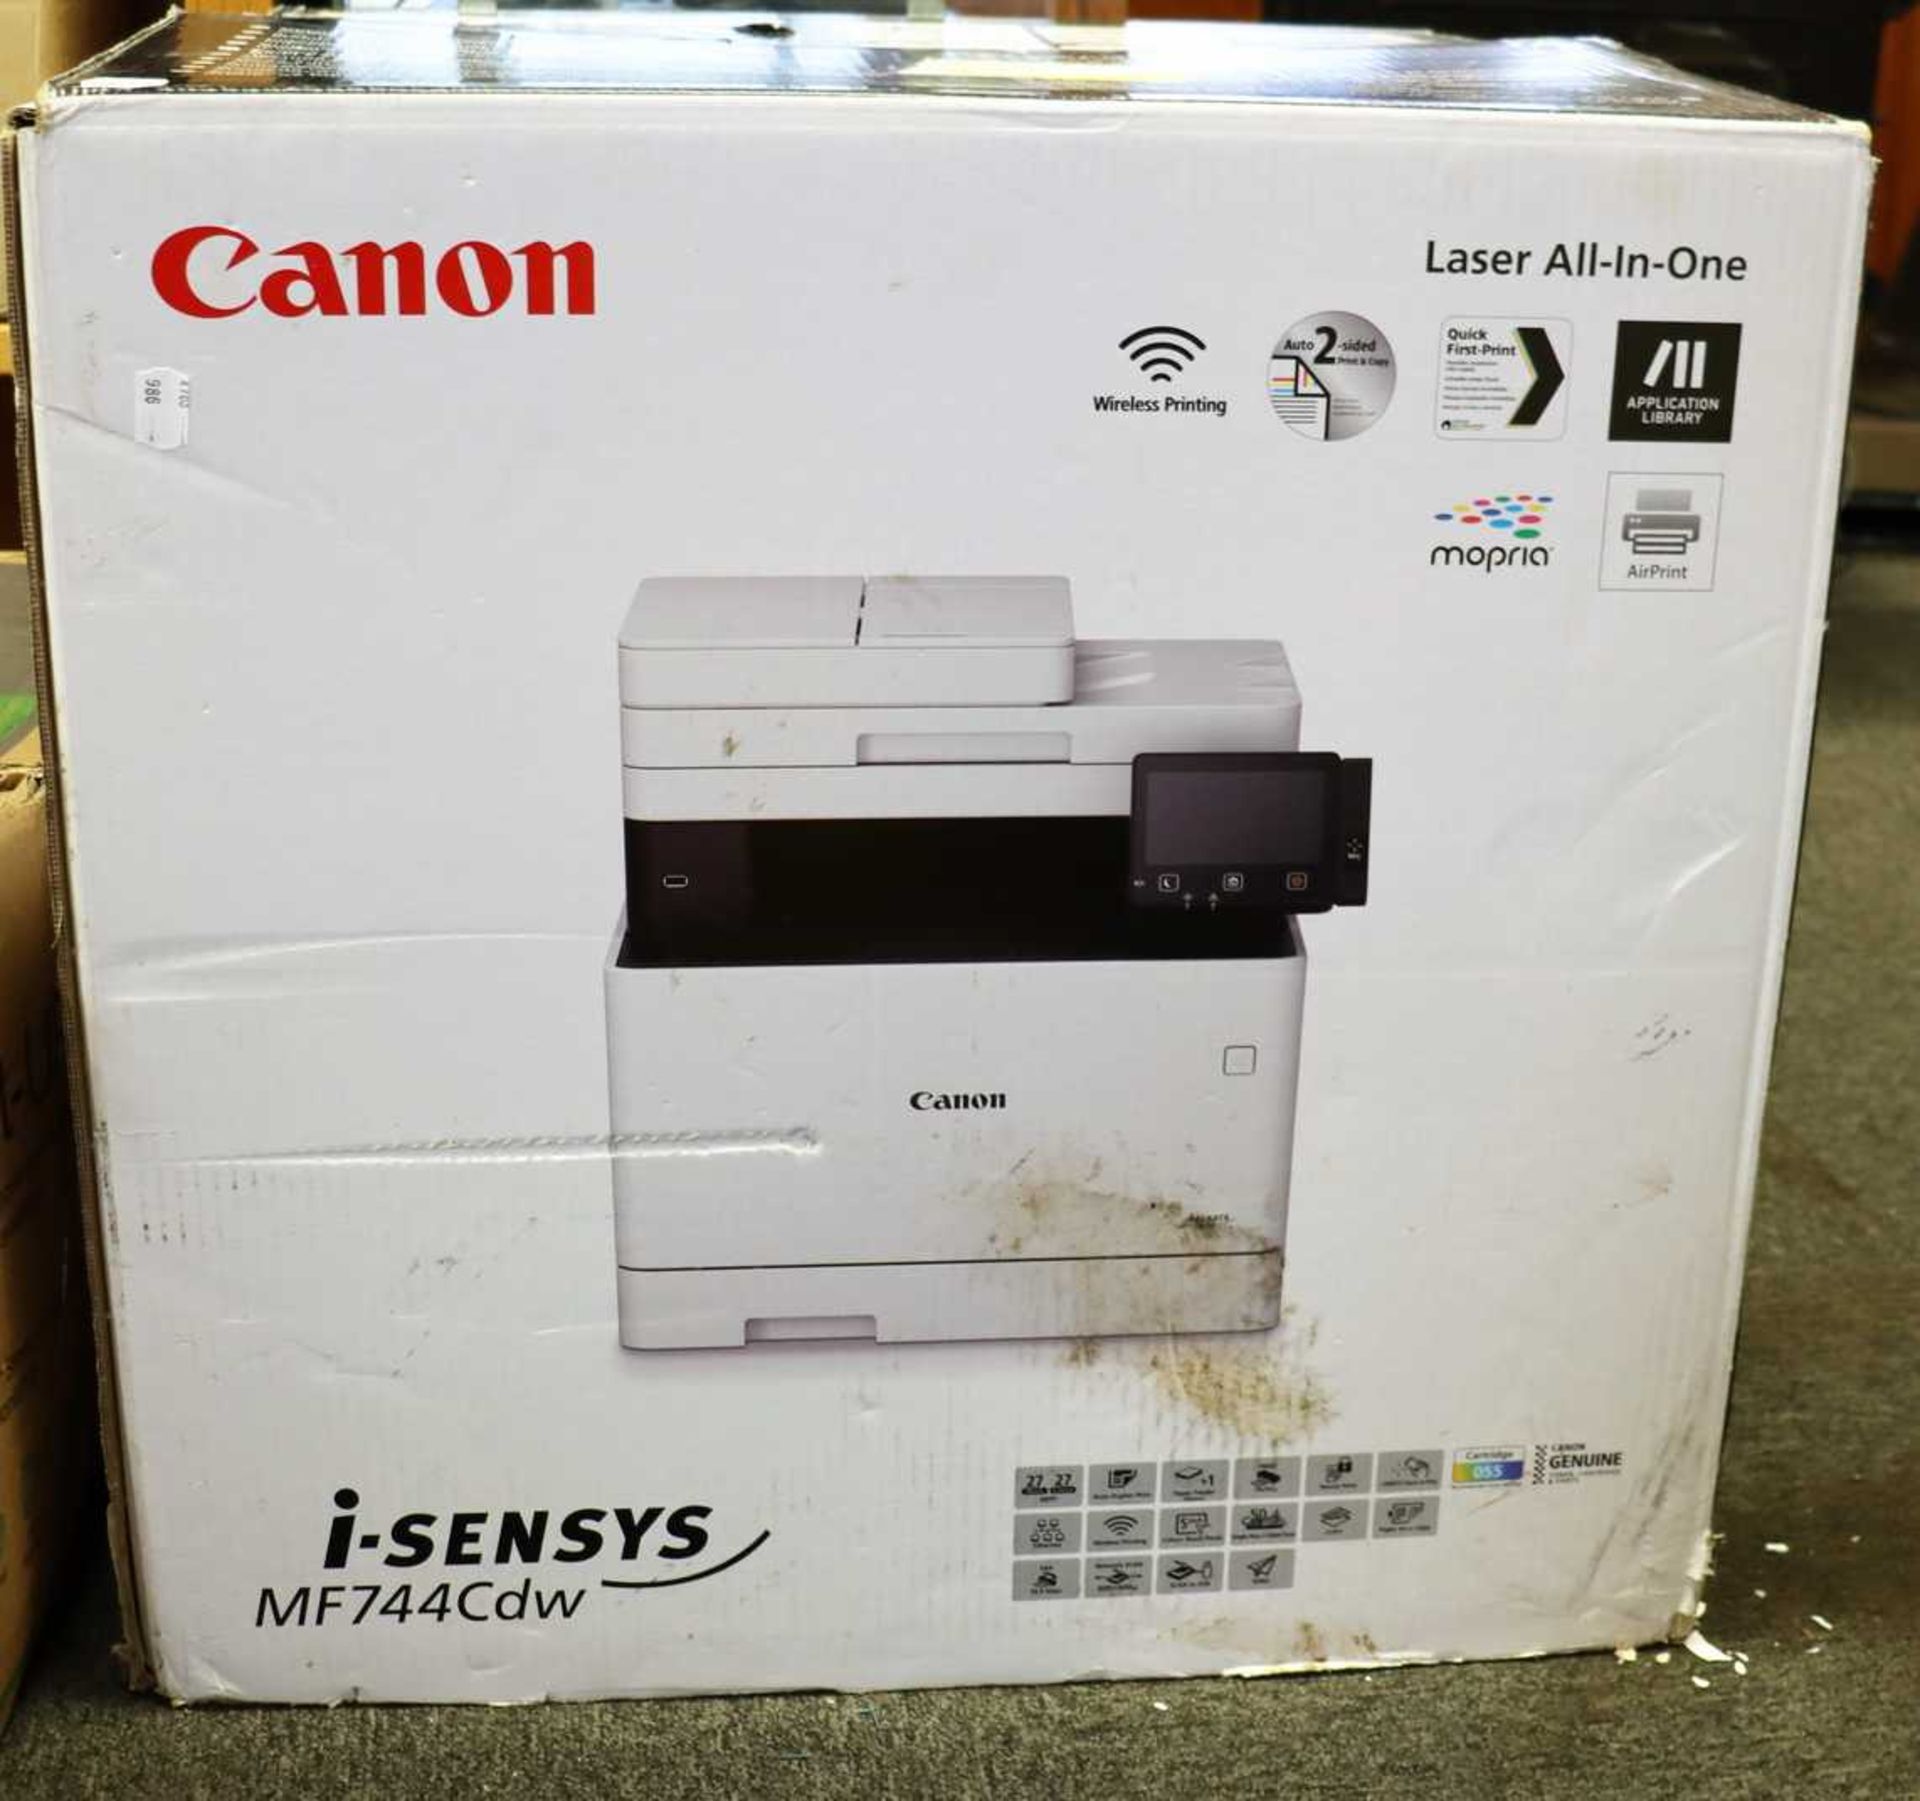 A Canon i-SENSYS MF744Cdw All-In-One Colour Laser Printer (Boxed. Possibly pre-owned.).